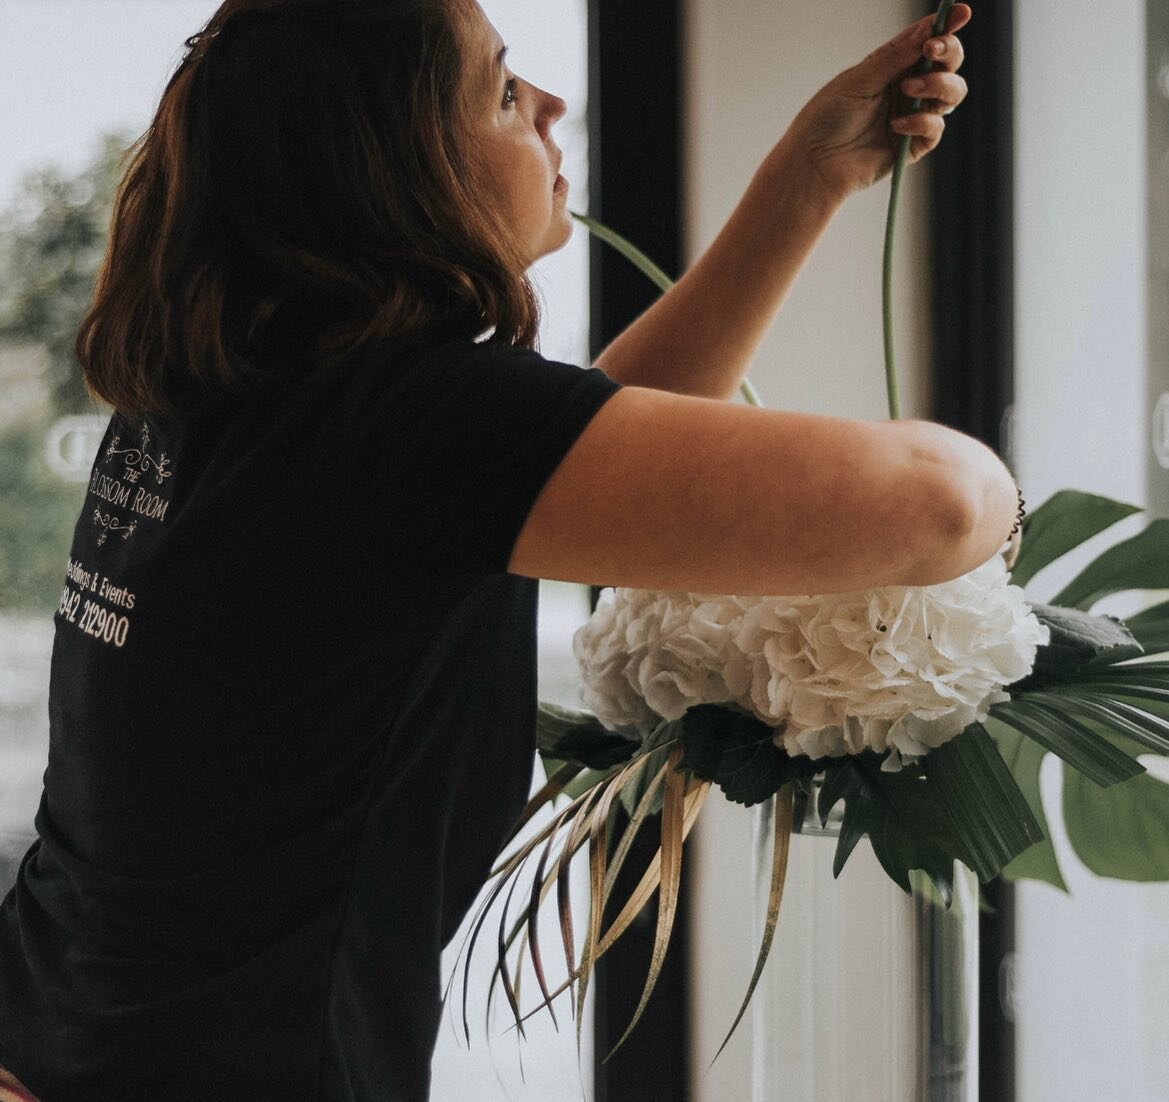 Who runs @the_blossom_room ? 

After an influx of new followers recently I thought I would introduce myself and answer some questions. 

So this is me., Carol Peacock doing my thing.  So I am a wedding floral designer and owner of the business. I als